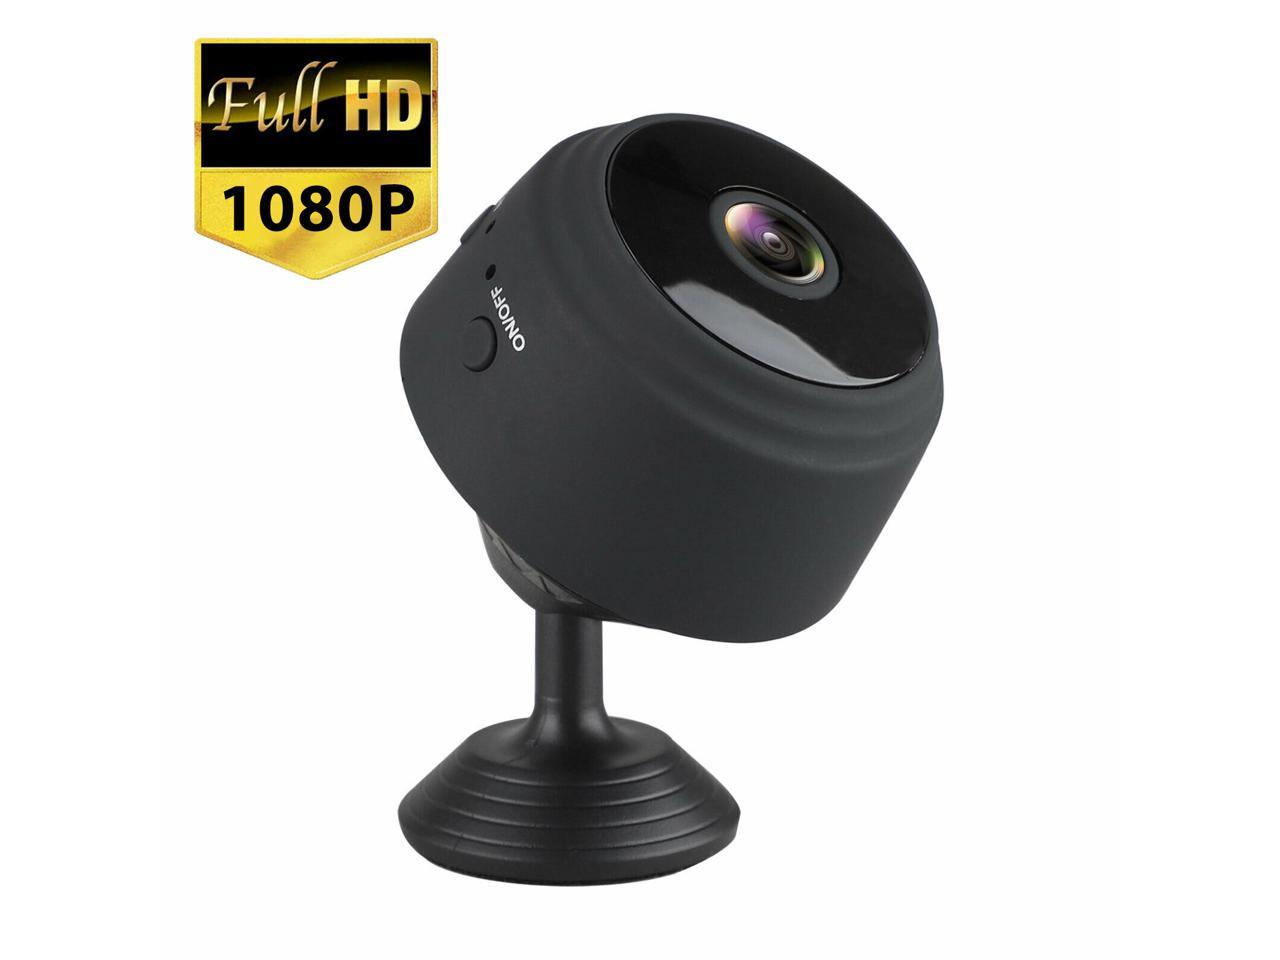 3.0 Megapixel FHD 1080P WiFi Surveillance Camera Wireless Hidden Live Streaming Mini Spy Camera Upgraded Motion Activated/Night Vision IP Nanny Security Cam for Home/Outdoor,Included 32GB Storage 